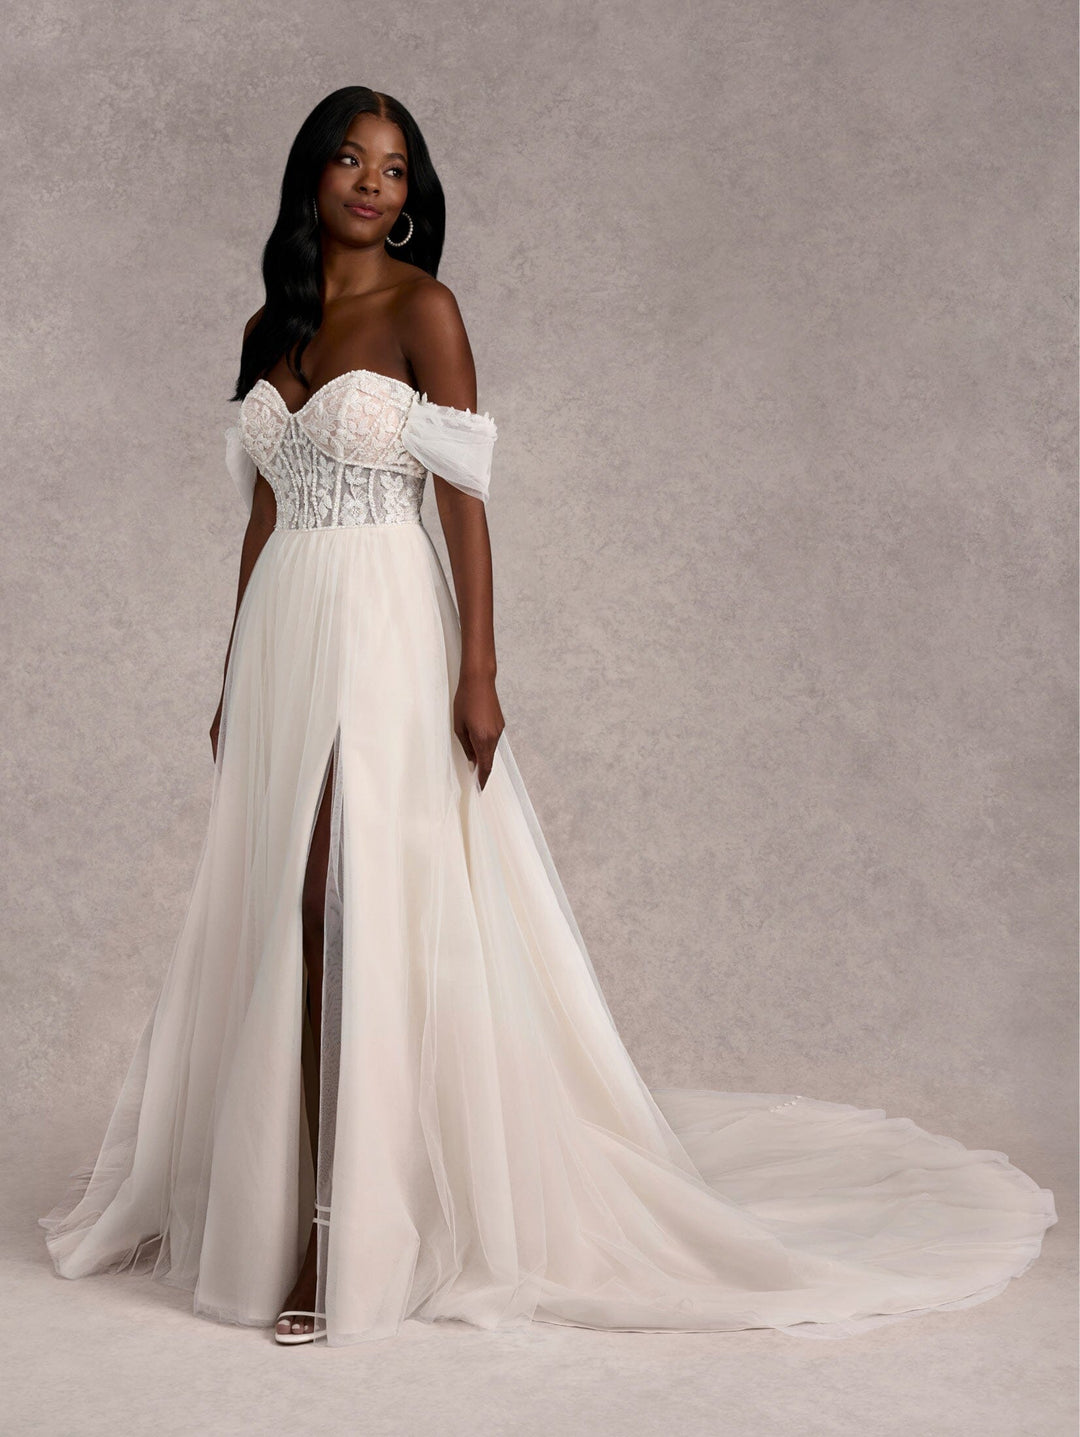 Sweetheart Slit Bridal Gown by Adrianna Papell 31268